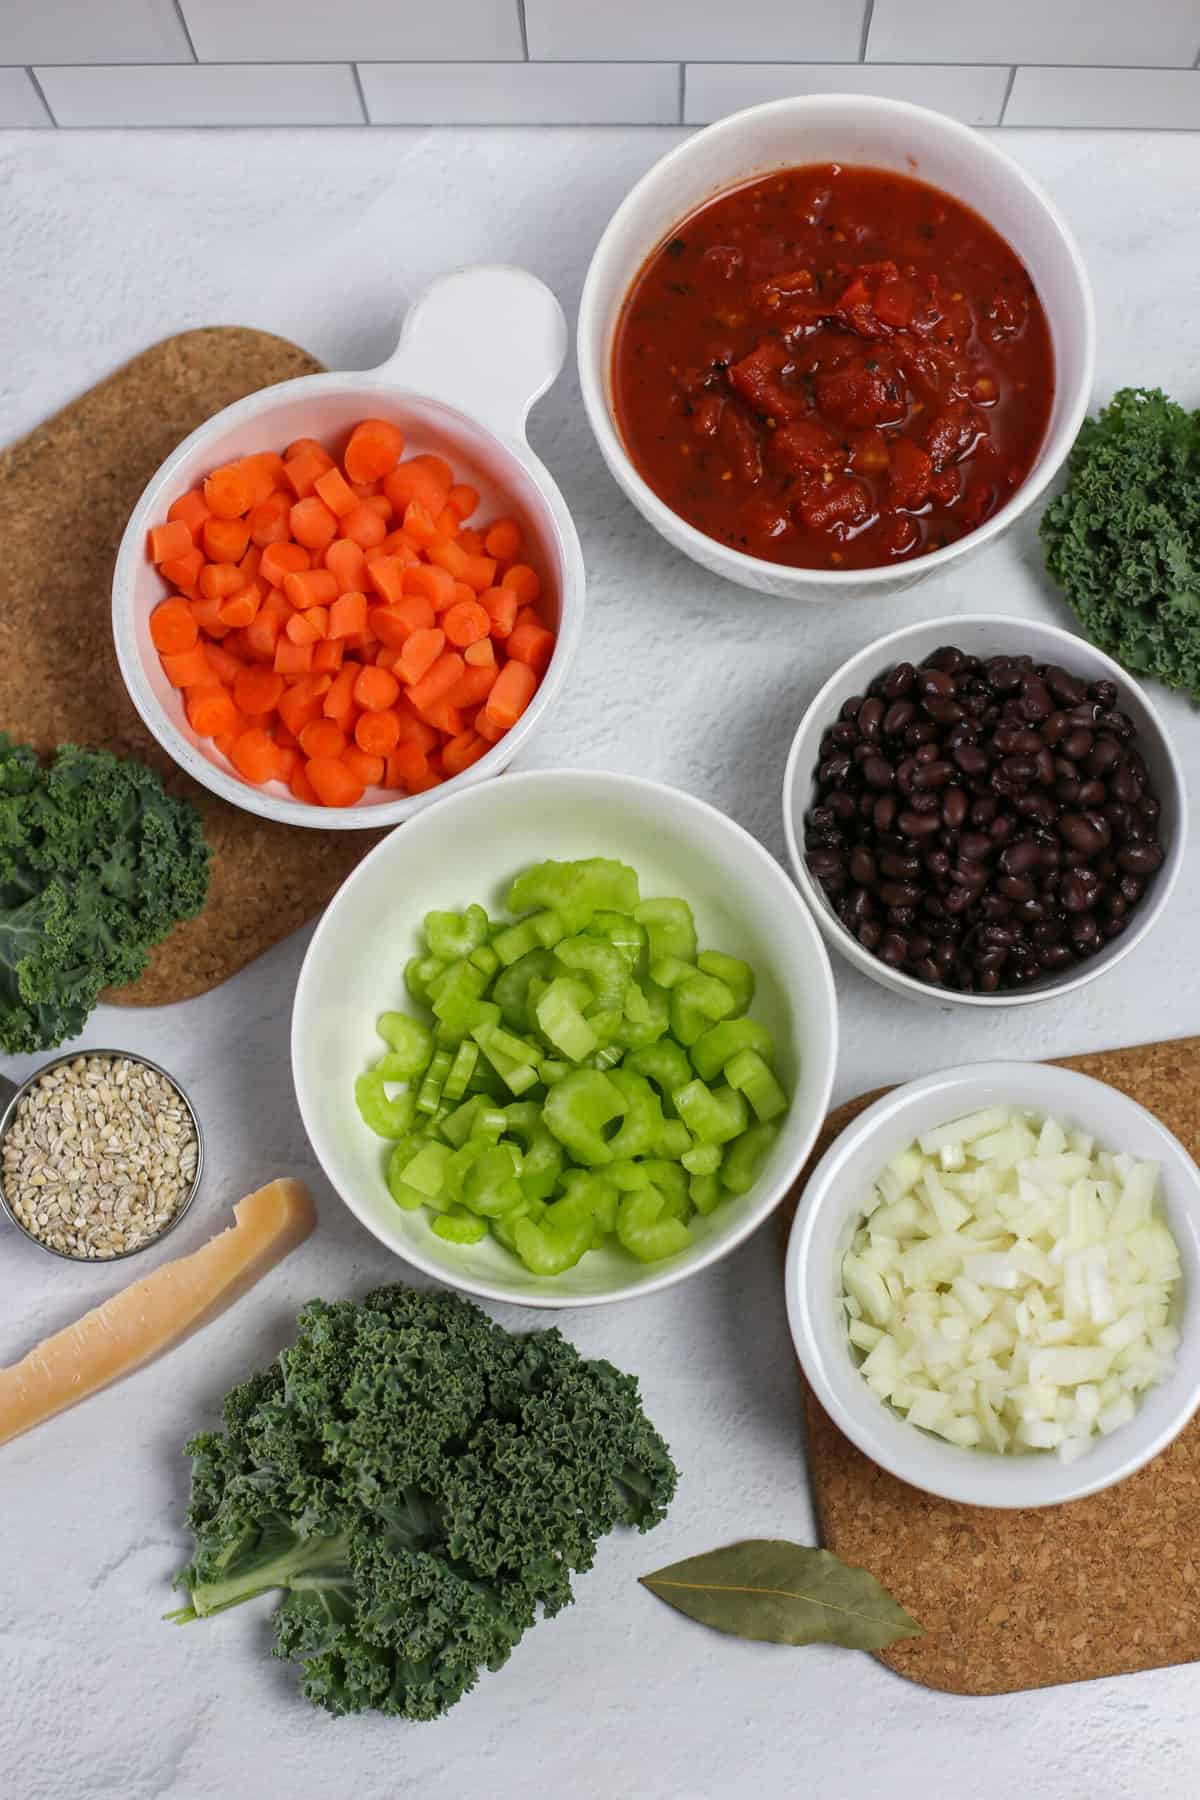 Ingredients for instant pot vegetable soup measured into bowls and setting on the counter.